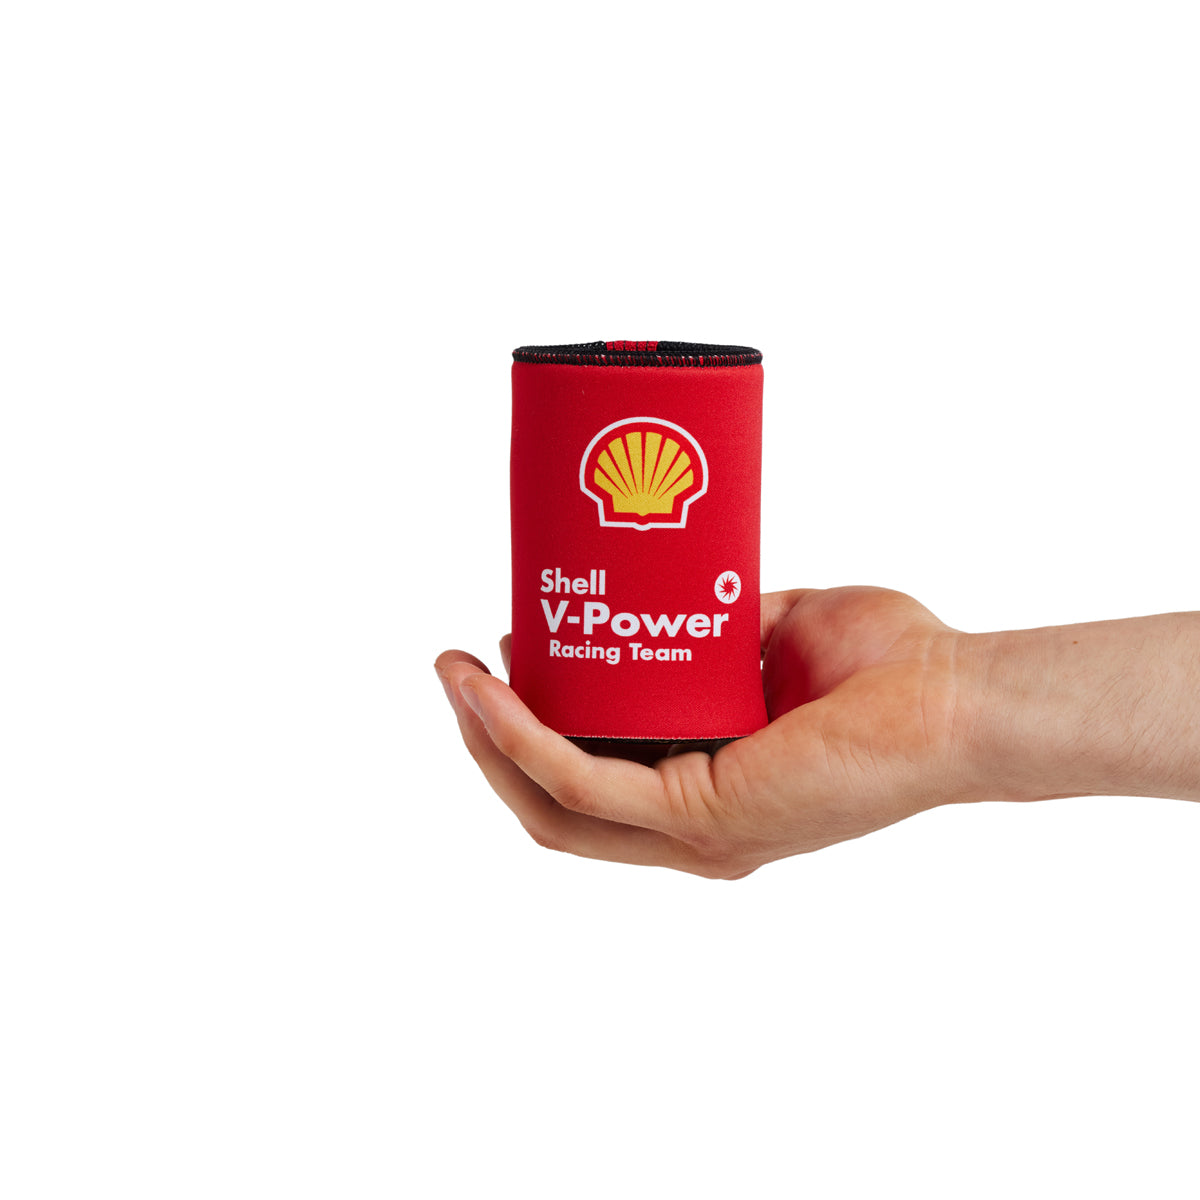 Shell V-Power Racing Team Can Cooler